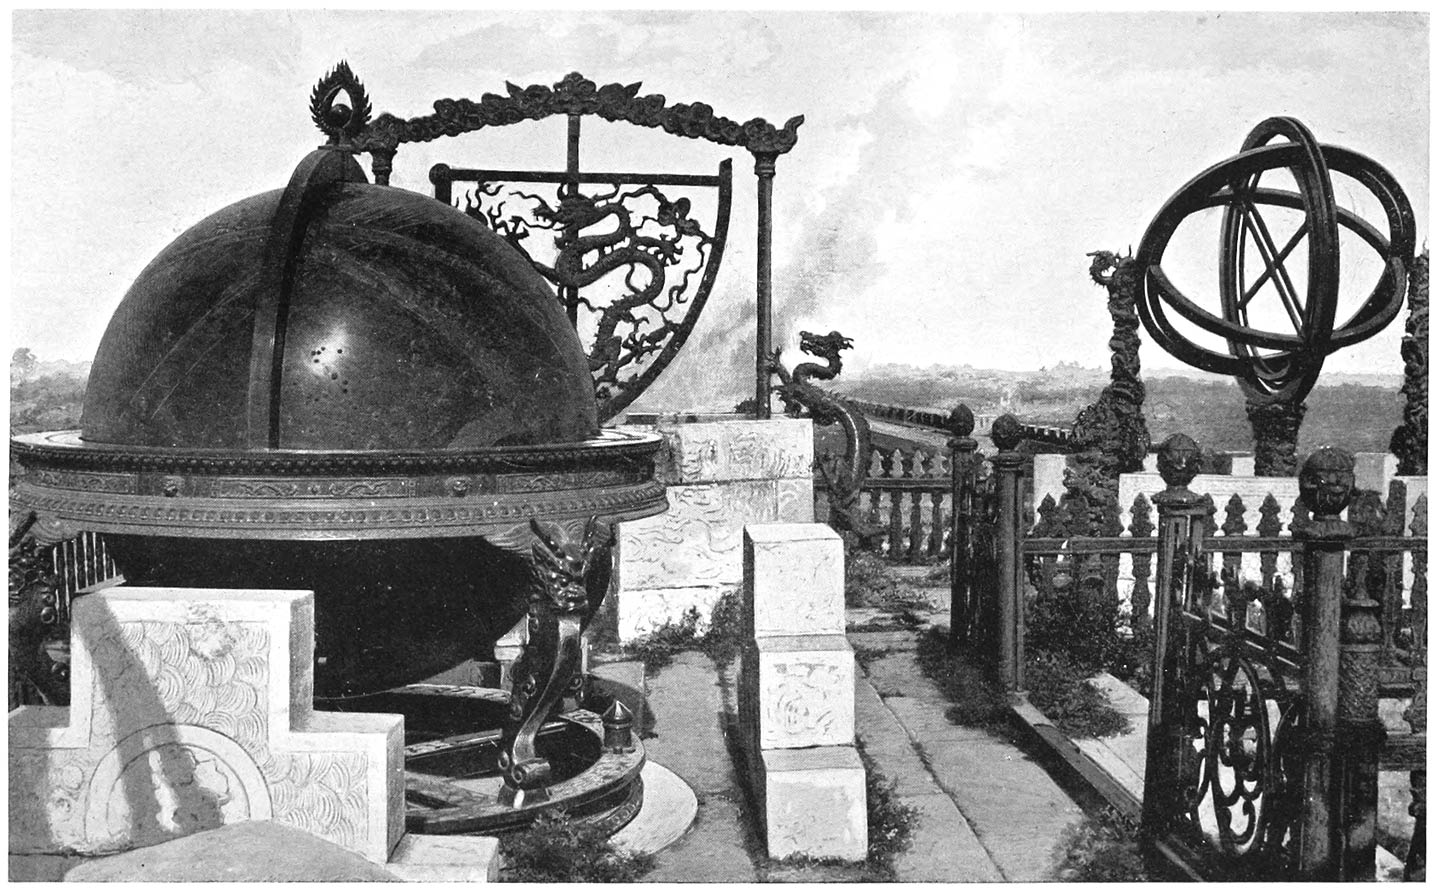 ANCIENT BRONZE ASTRONOMICAL INSTRUMENTS ON THE CITY WALL, PEKING